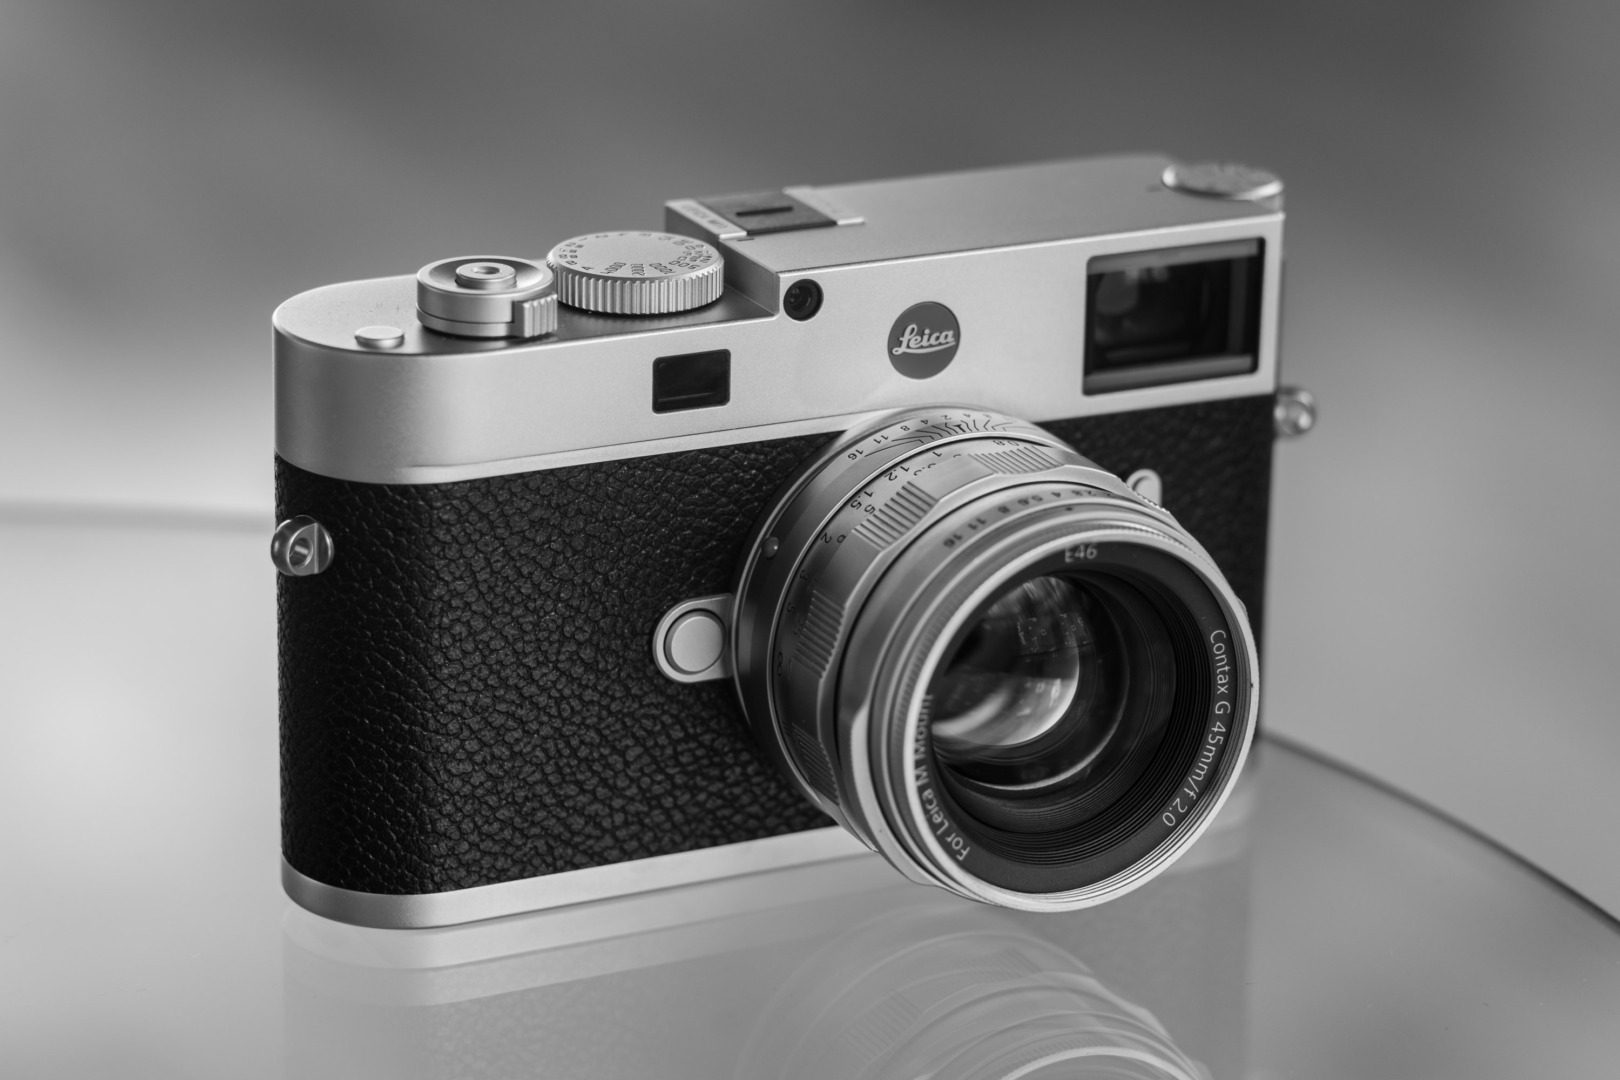 The Leica M11 in chrome with a vintage lens, the Contax G45 in a Funleader body